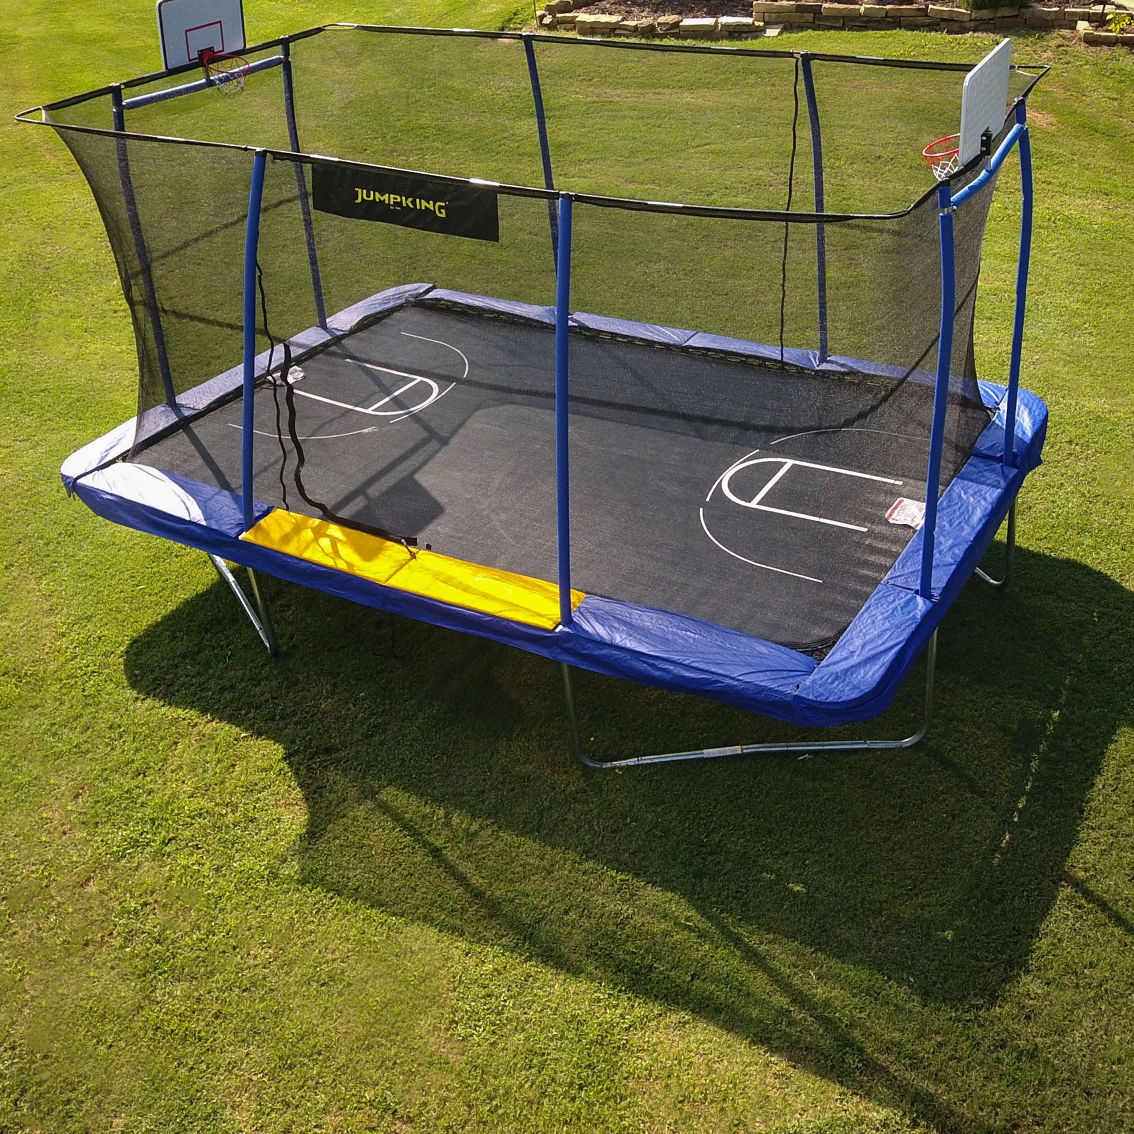 JumpKing 10' x 15' Rectangular Trampoline With 2 Basketball Hoops & Court Printing - Image 2 of 5